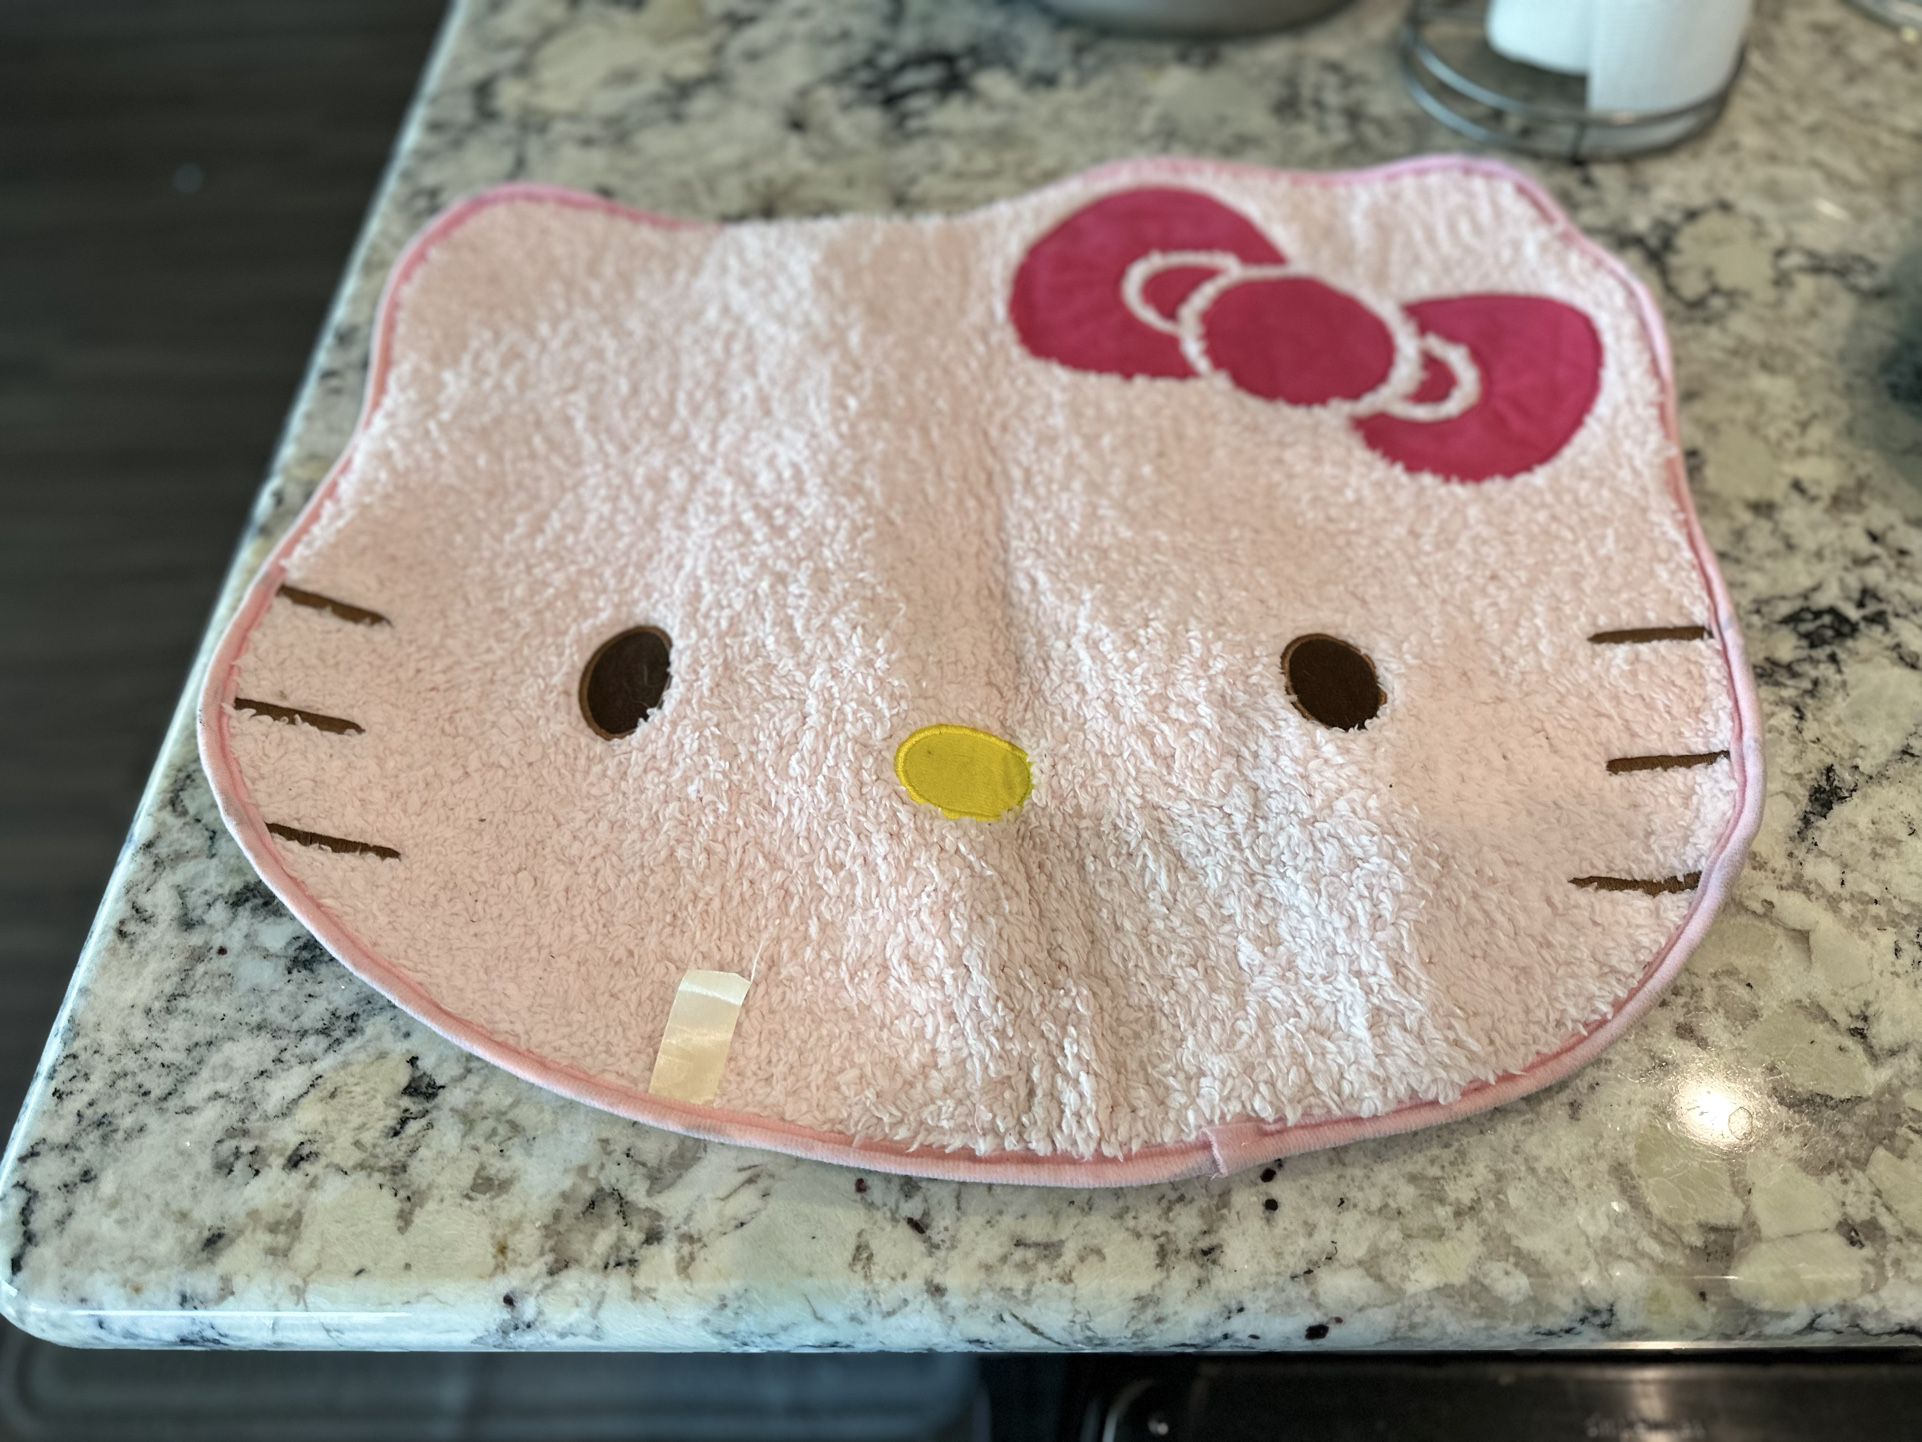 Never Used: Cute Hello Kitty Soft Rug, Best For Kids bedroom, Pink